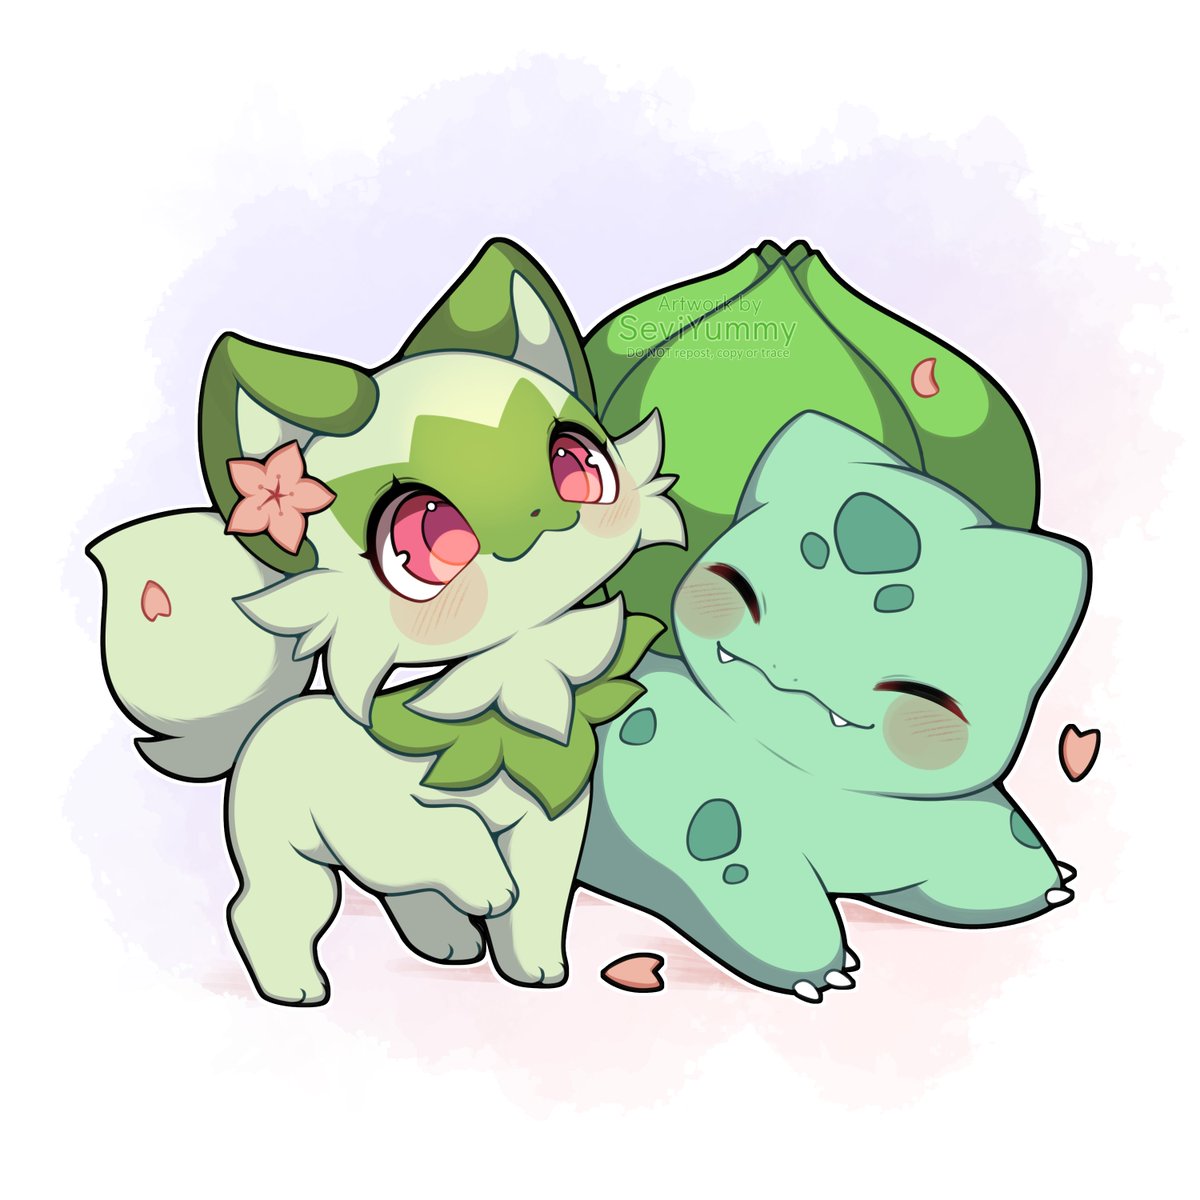 bulbasaur pokemon (creature) no humans closed eyes fangs closed mouth blush smile  illustration images